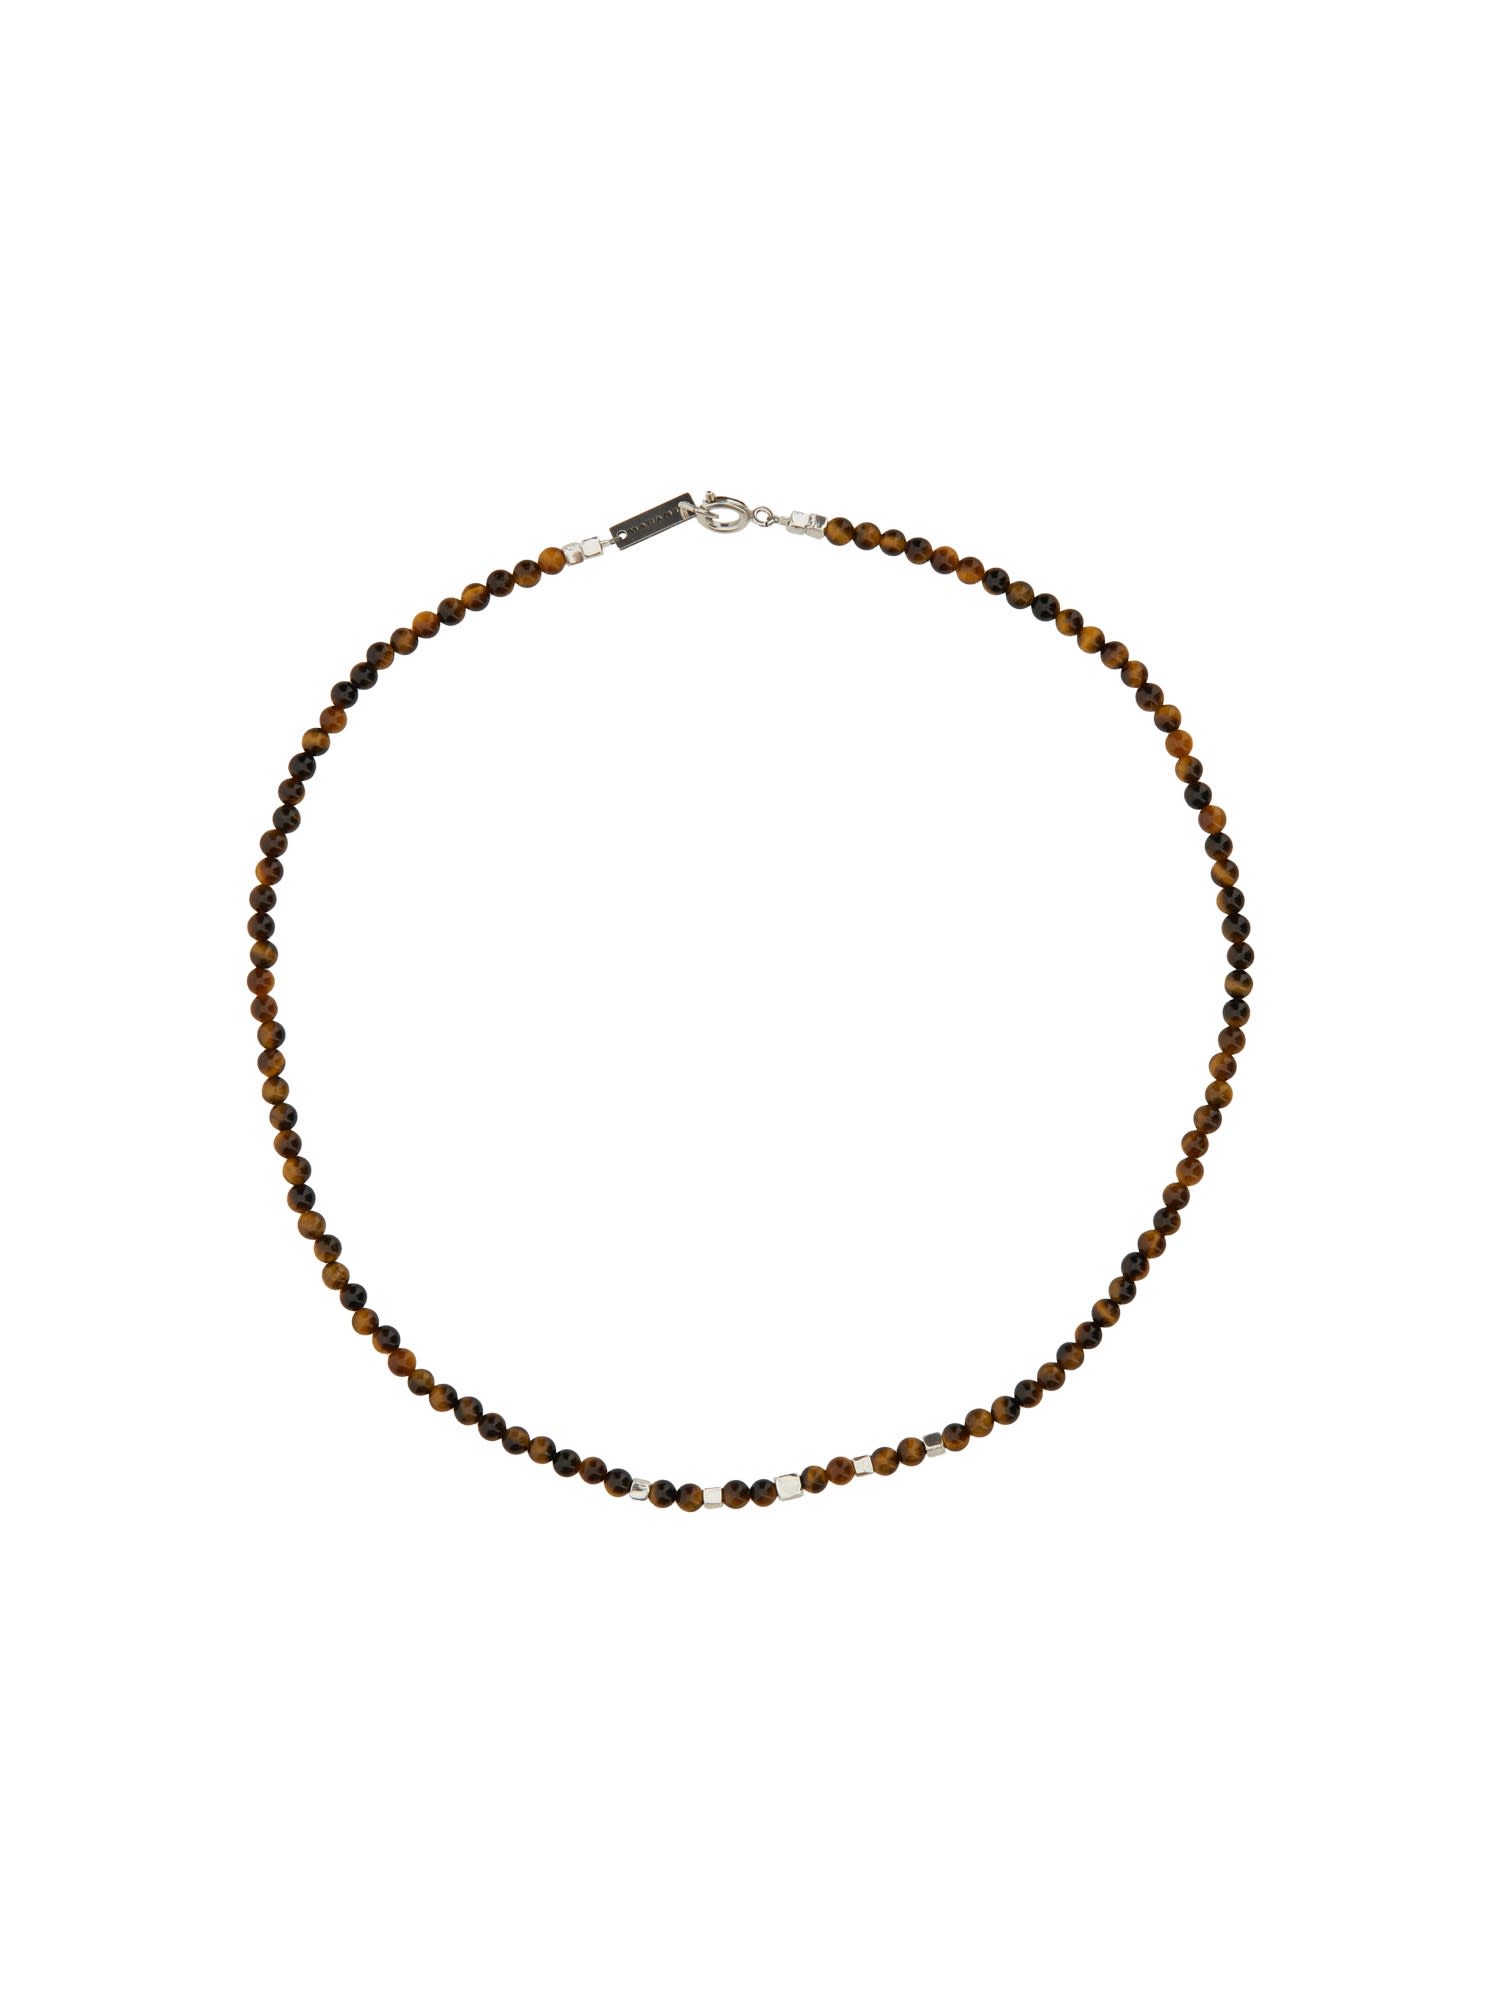 ISABEL MARANT NECKLACE WITH METAL DETAILS